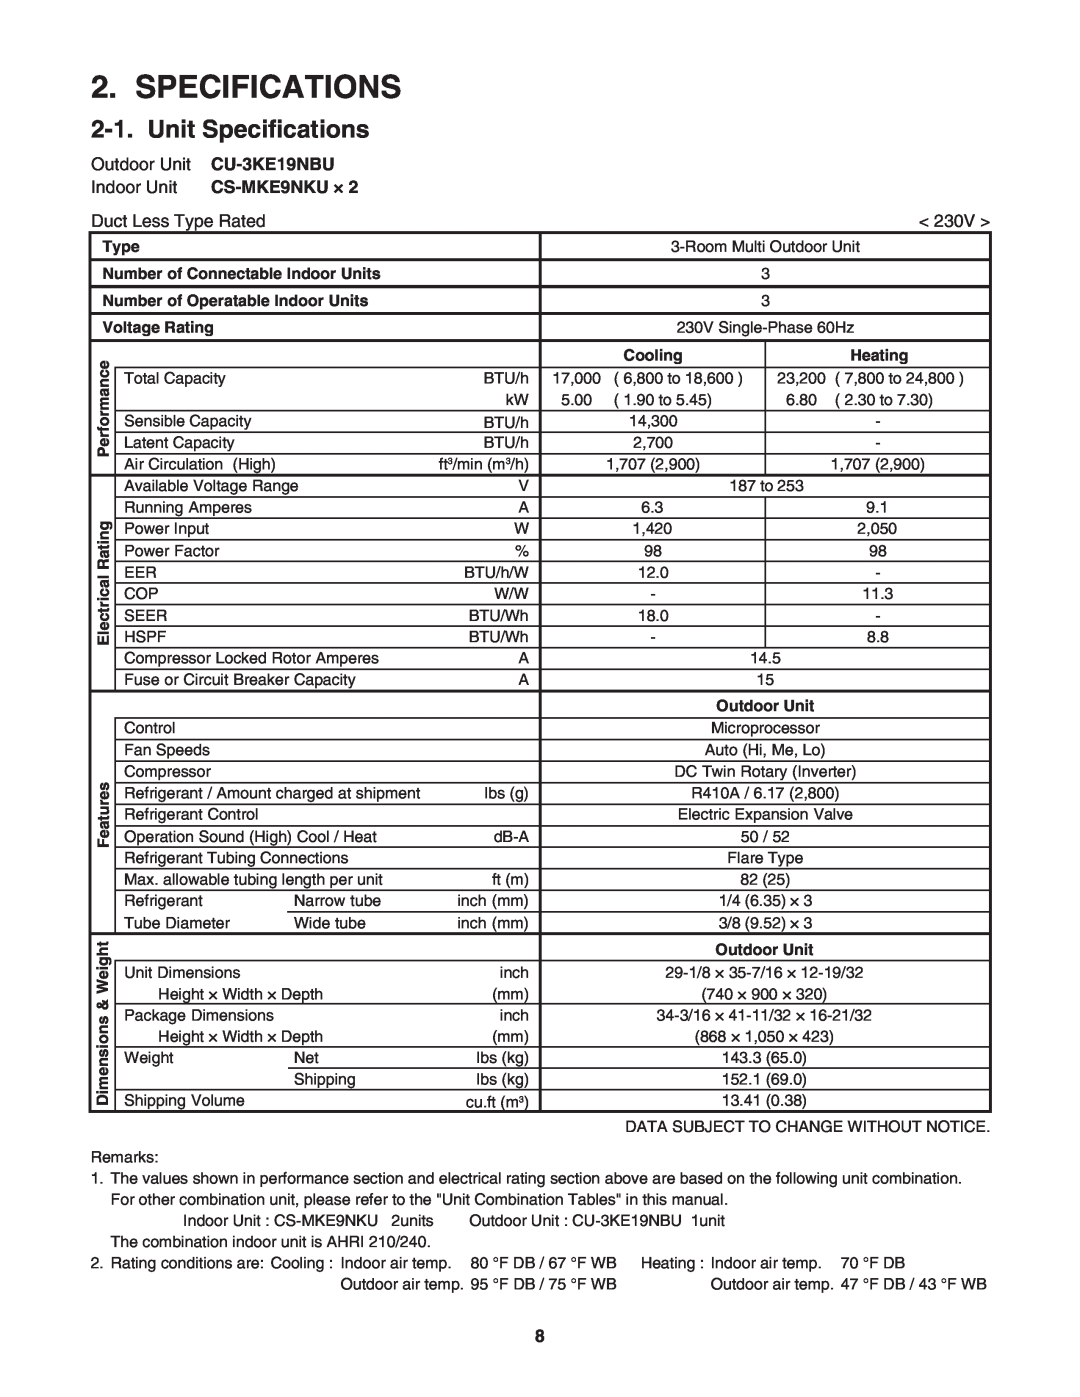 Panasonic CU-3KE19NBU Unit Specifications, Type, Number of Connectable Indoor Units, Number of Operatable Indoor Units 